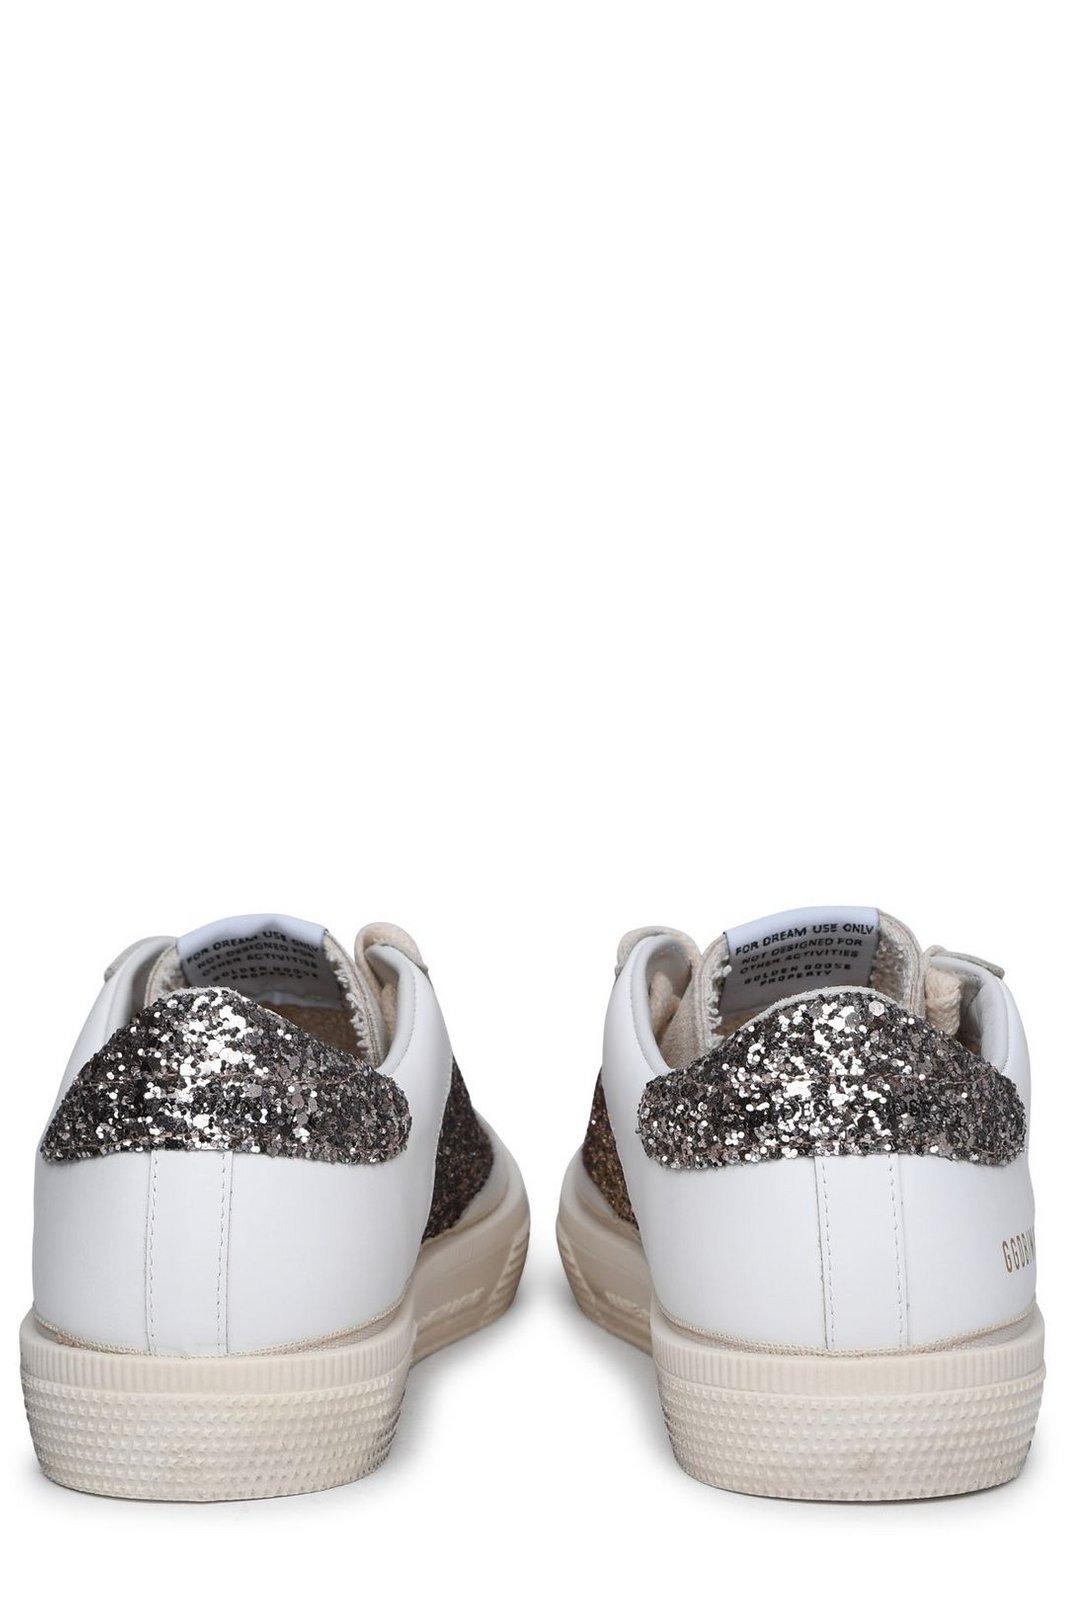 Shop Golden Goose N May Star Glittered Sneakers In White Cinder Seed